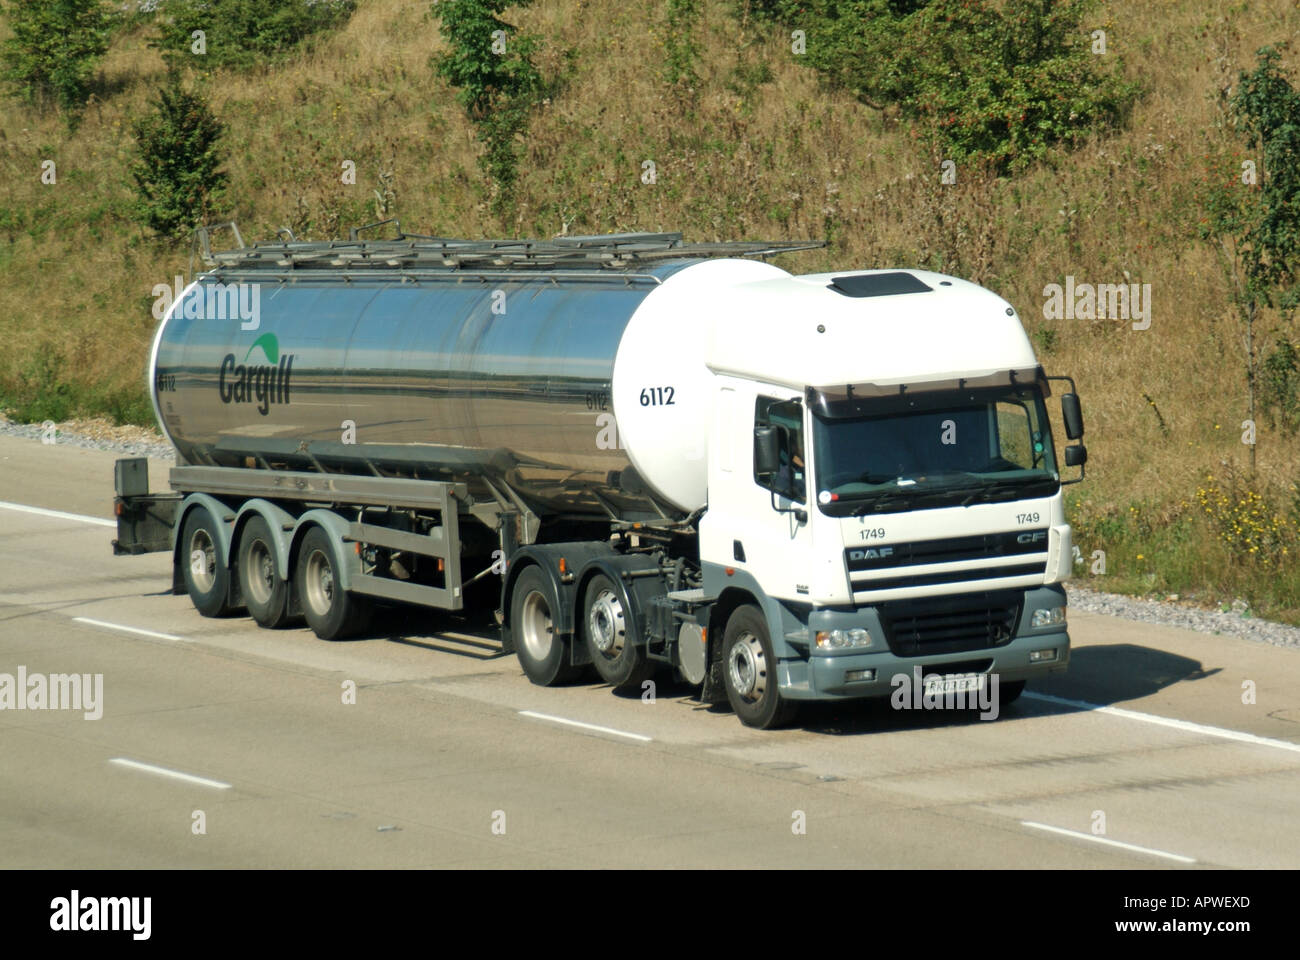 DAF lorry tyre saving economy raised axle towing articulated Cargill tanker trailer driving along UK English M25 motorway concrete road Stock Photo